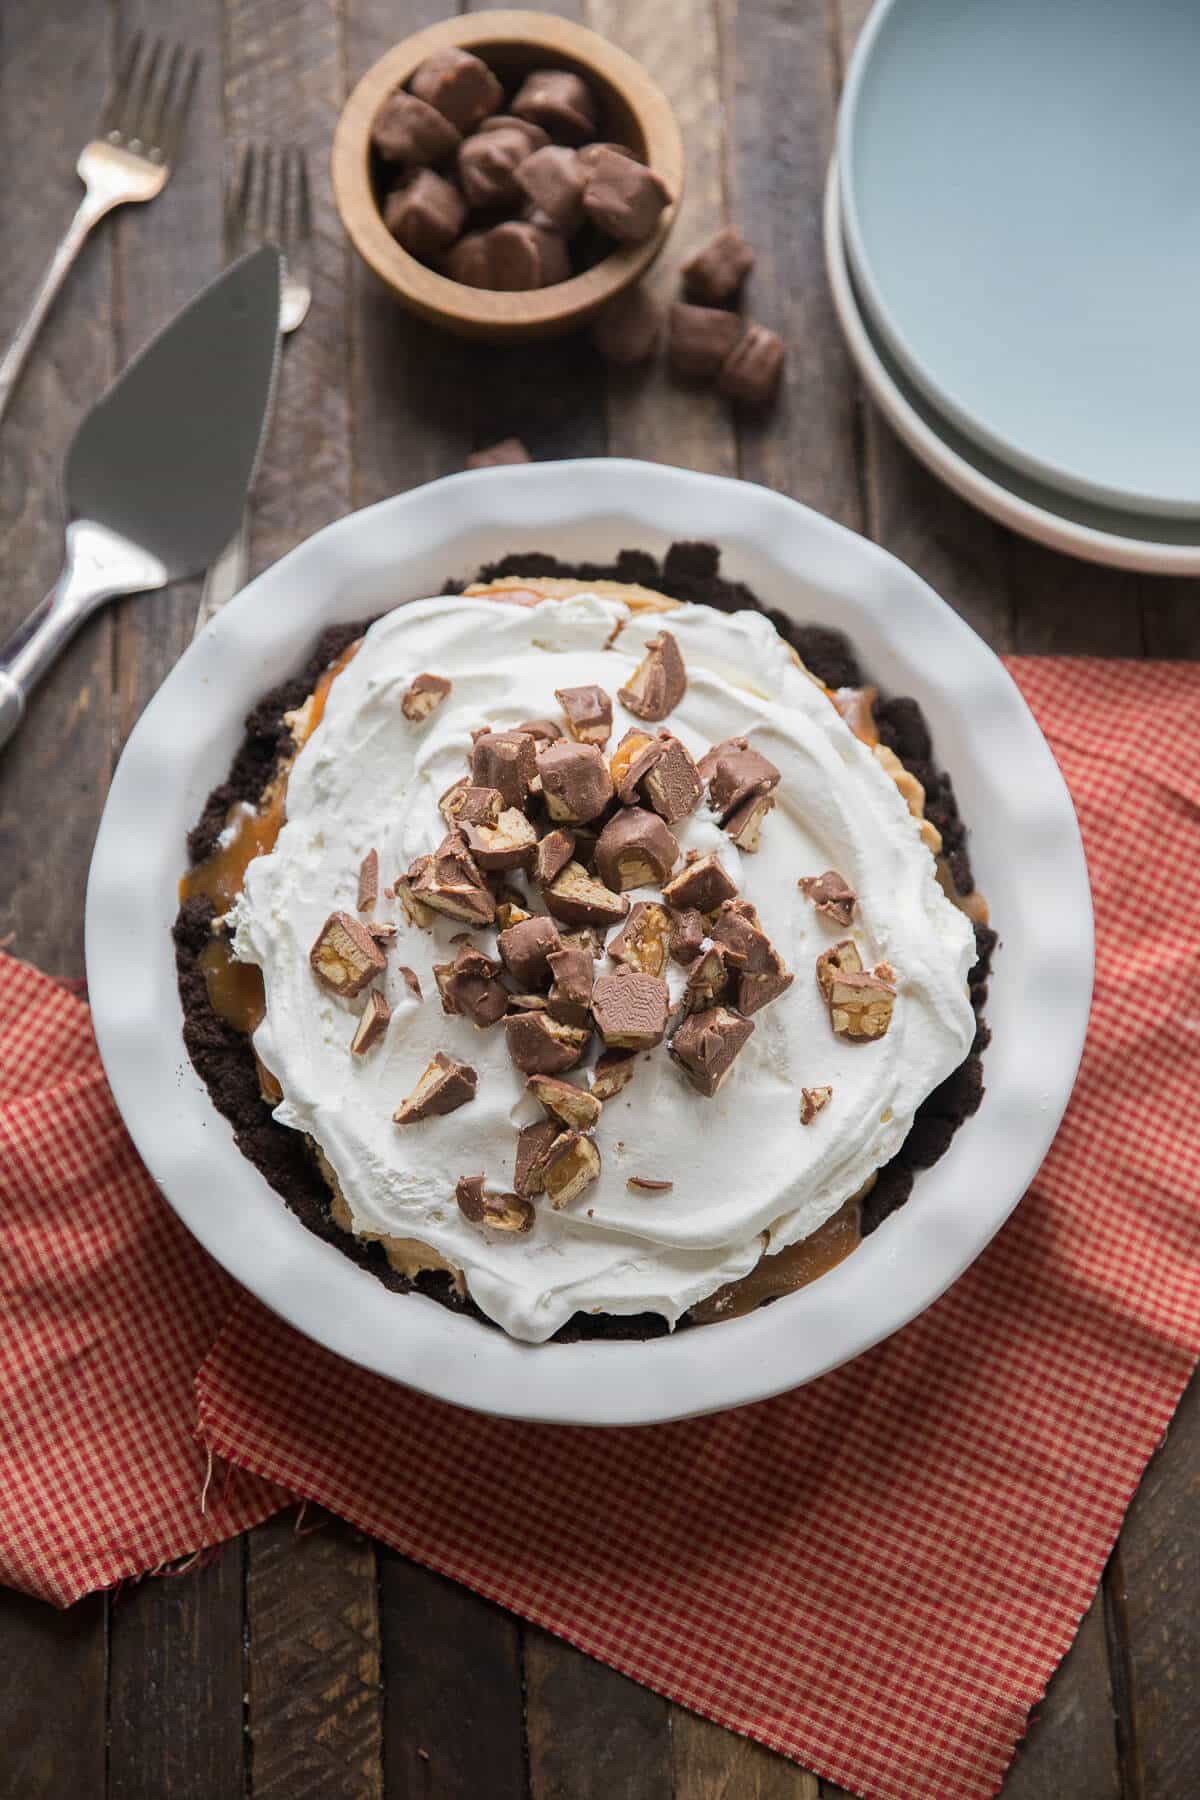 Peanut butter pie with caramel mixed in is a treat to behold! This recipe is a keeper!